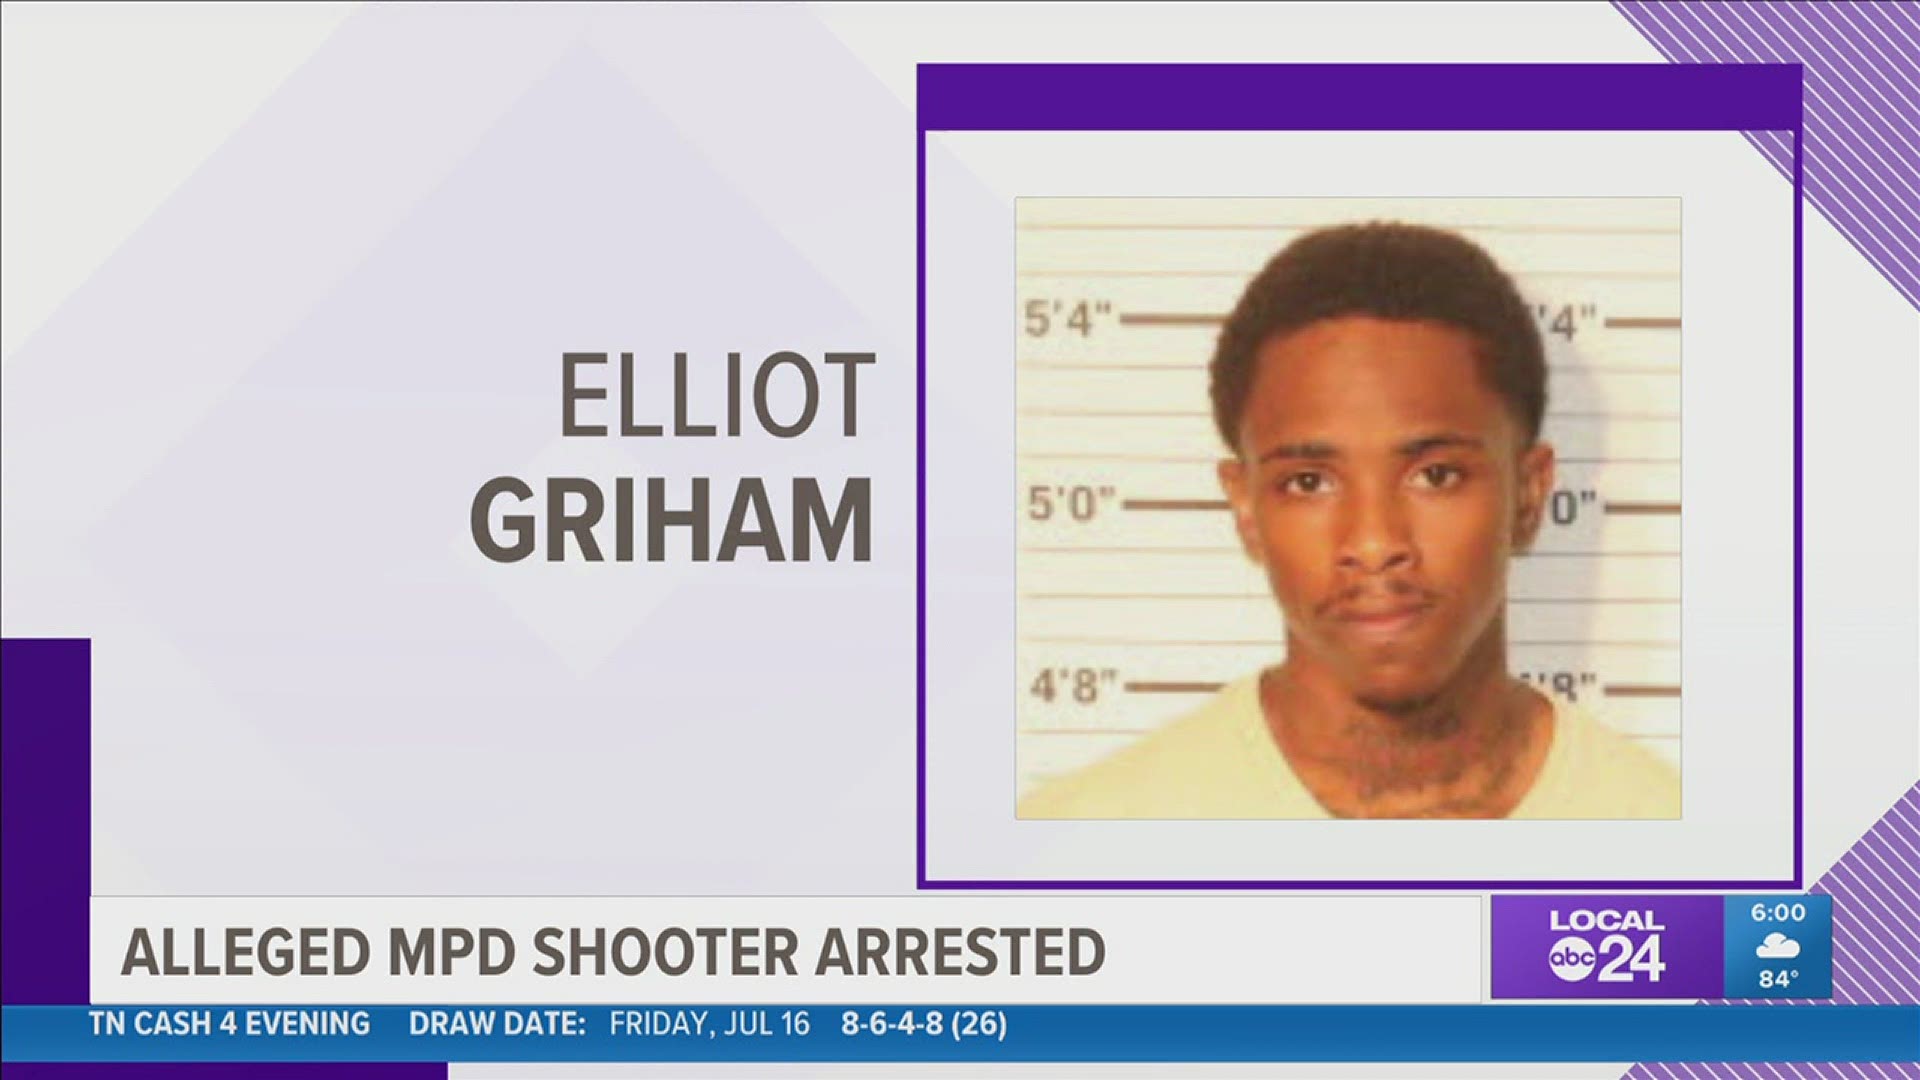 Elliot Girham was taken into custody for the shooting Wednesday, as well as an attempted murder warrant from January.